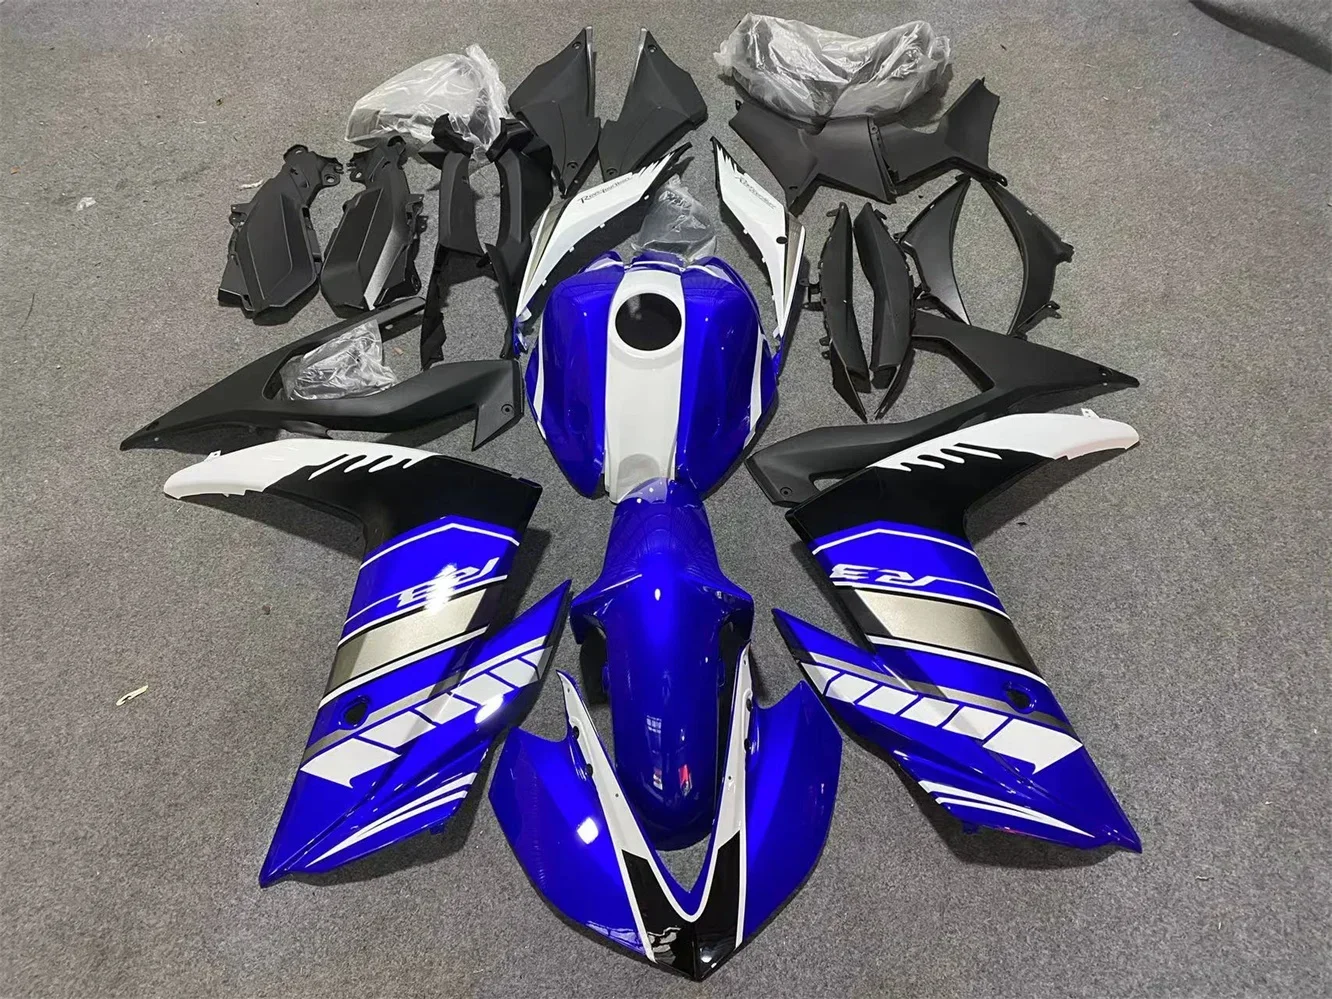 

For YAMAHA YZFR25 YZFR3 2015 2016 2017 2018 ABS Injection Fairing Kit Motorcycle R25 R3 15 16 17 18 Car Full Guard